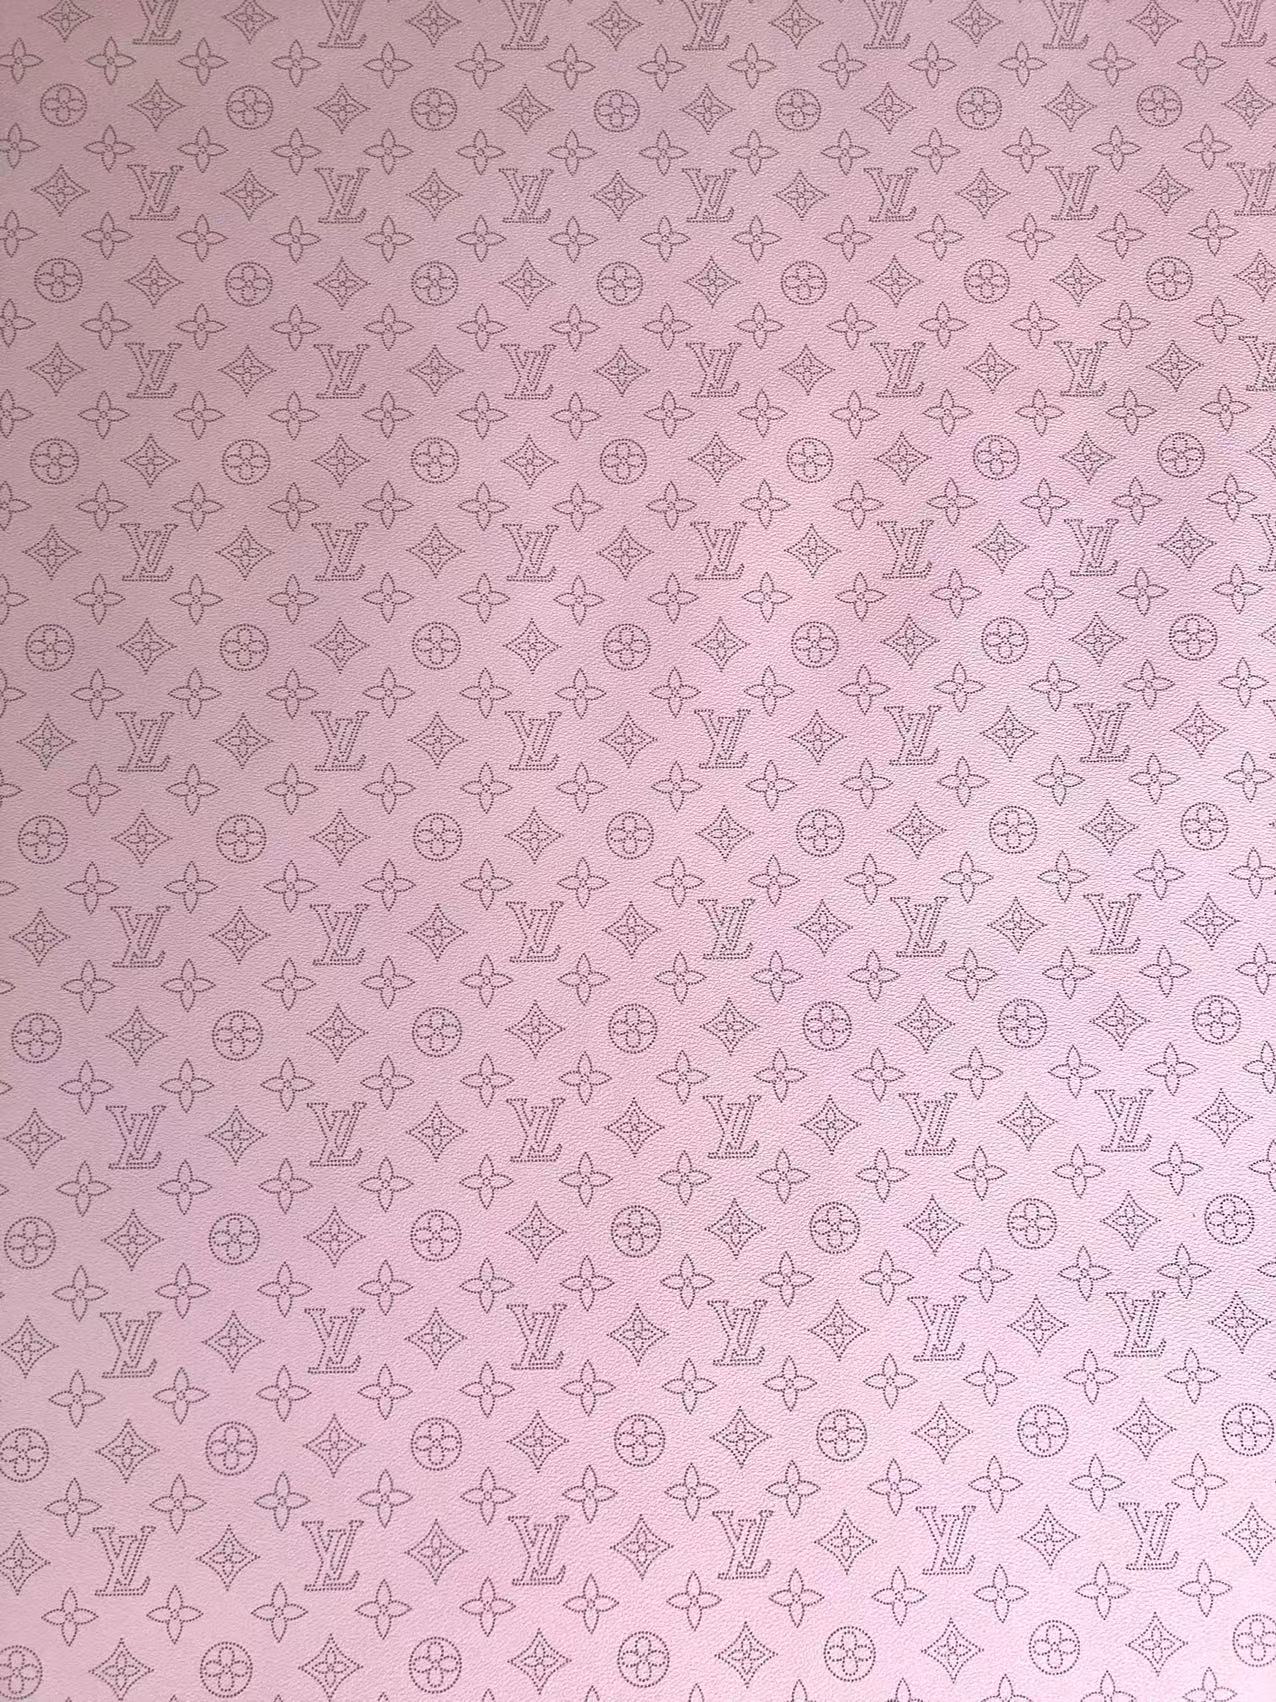 Pink Dot LV Leather for Custom Sneakers Bag Handcrafted